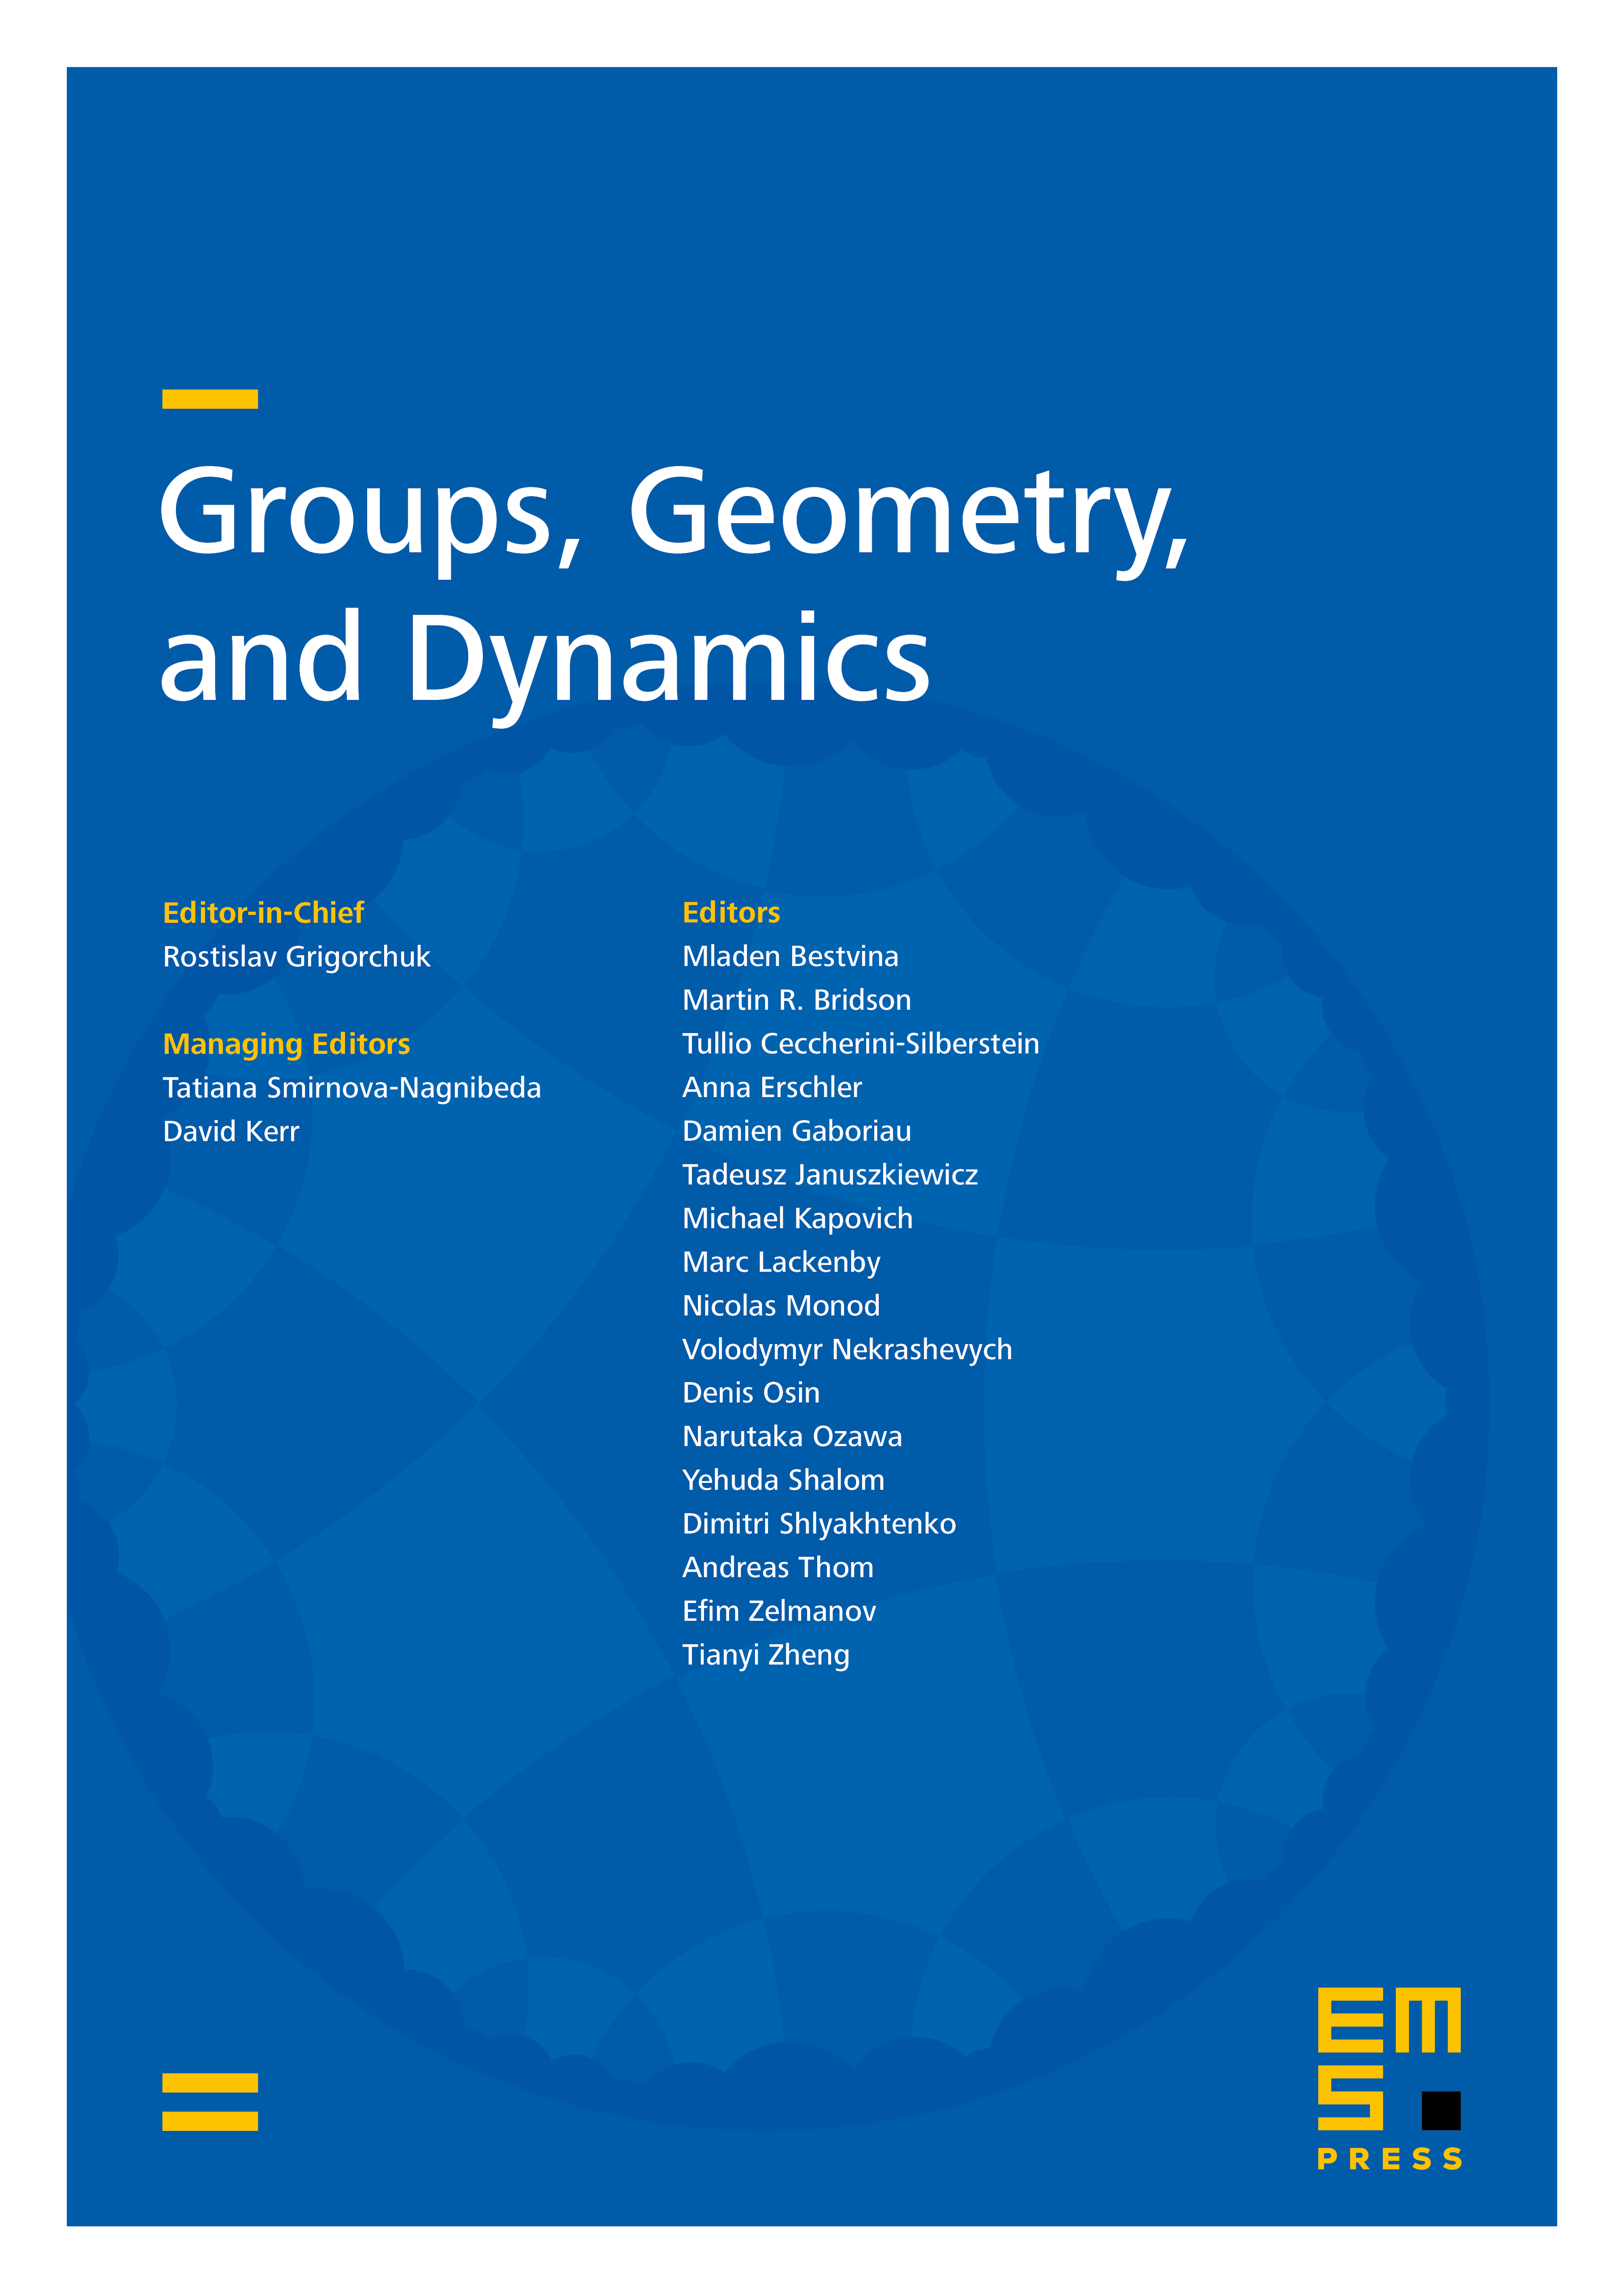 The mapping class group of a nonorientable surface is quasi-isometrically embedded in the mapping class group of the orientation double cover cover